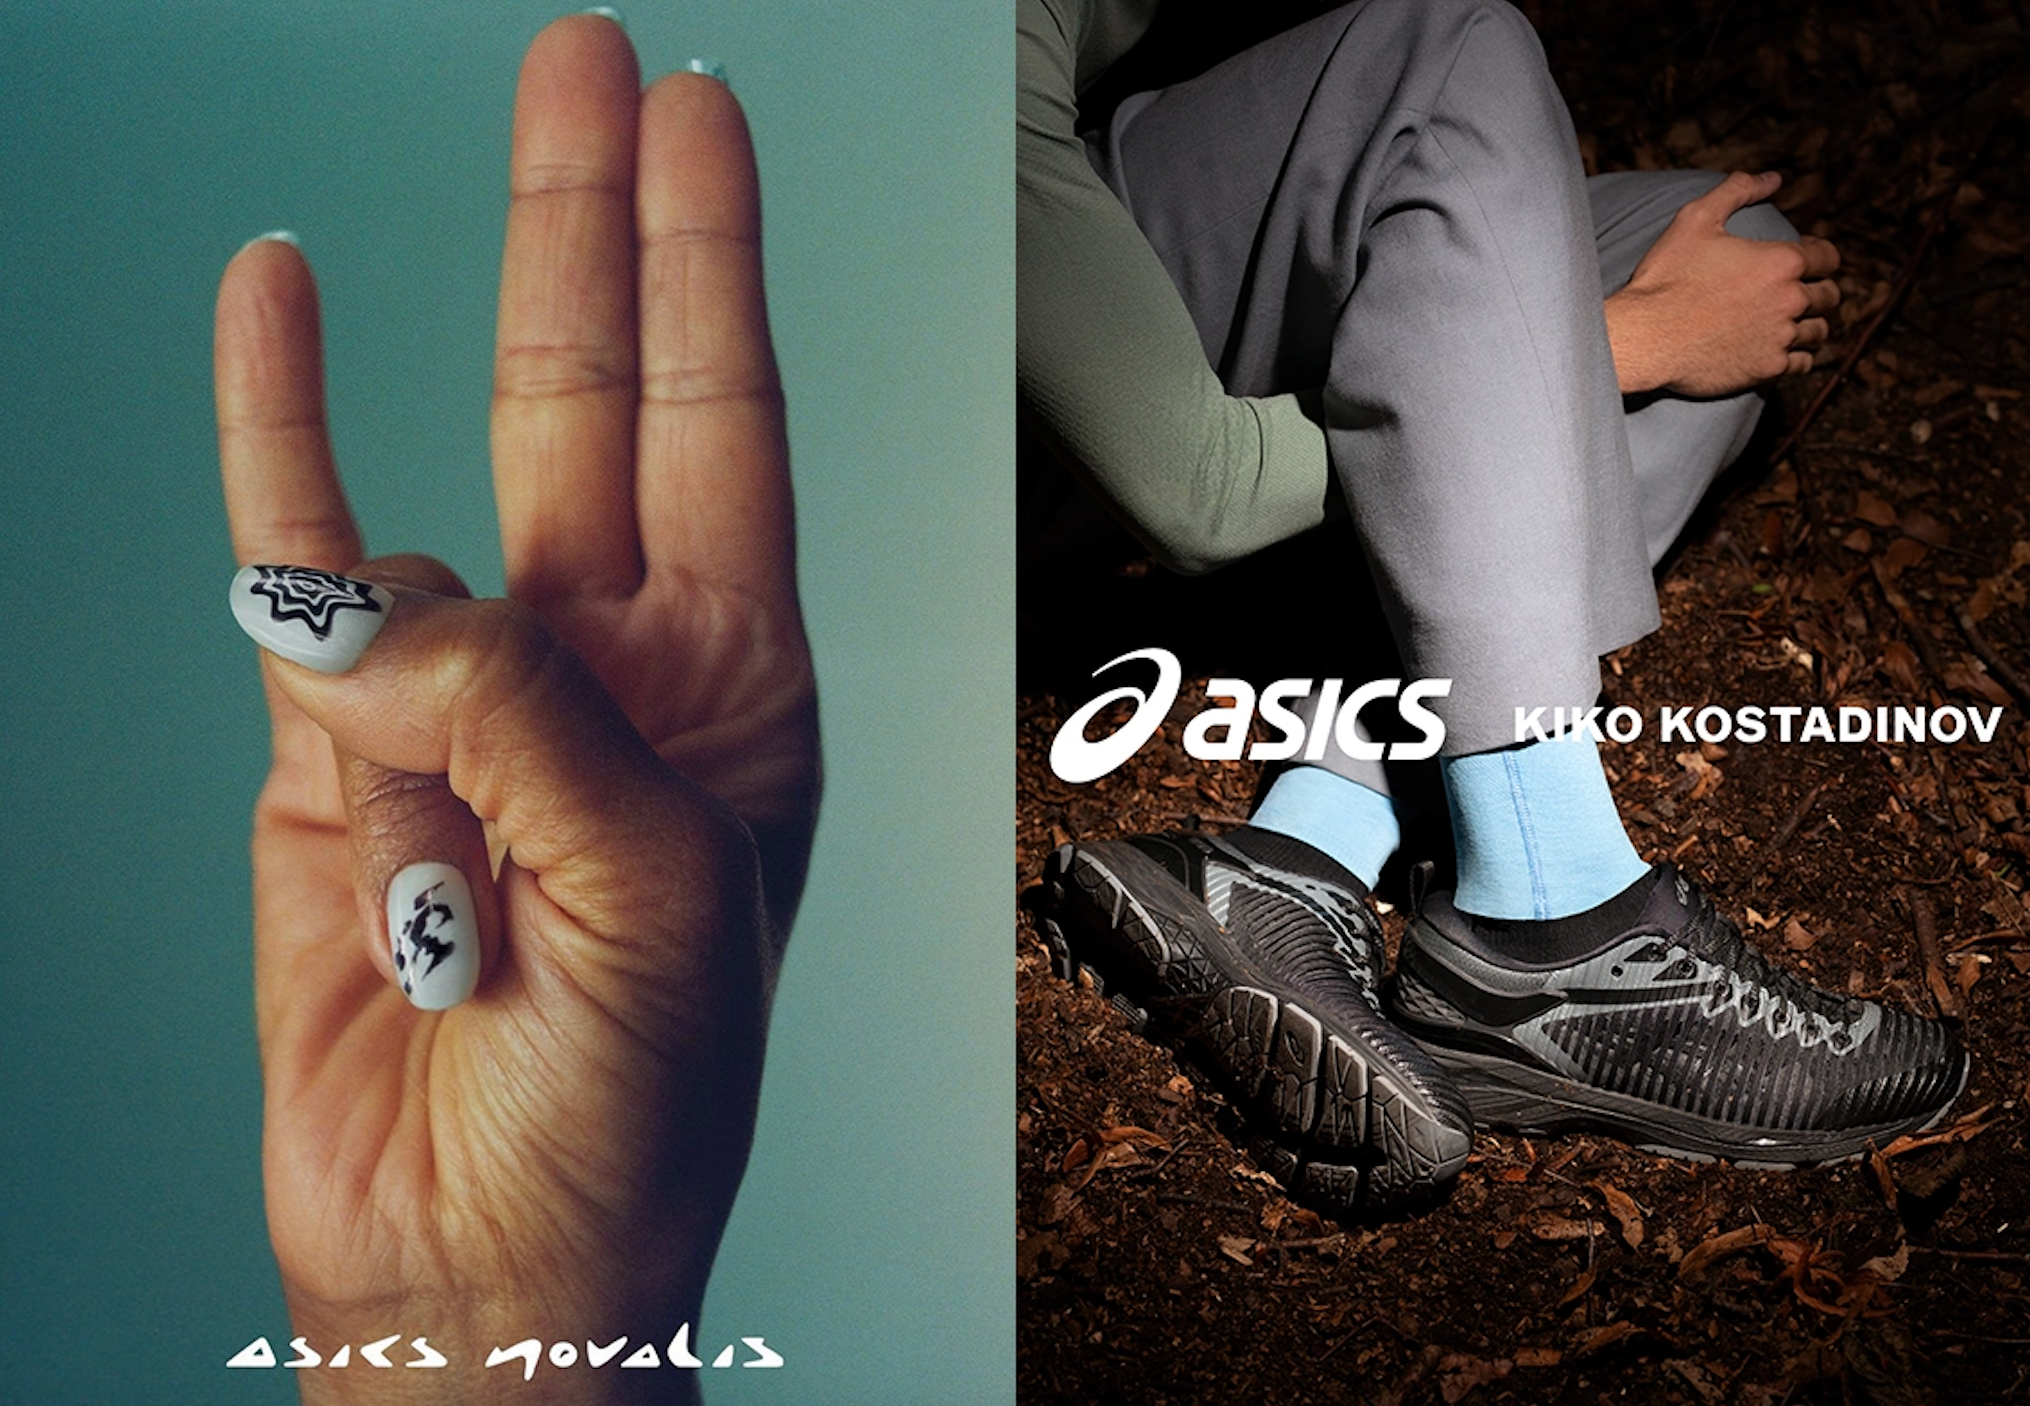 Kiko Kostadinov and Asics are taking a quieter approach to unisex clothing. Image: Sneaker News